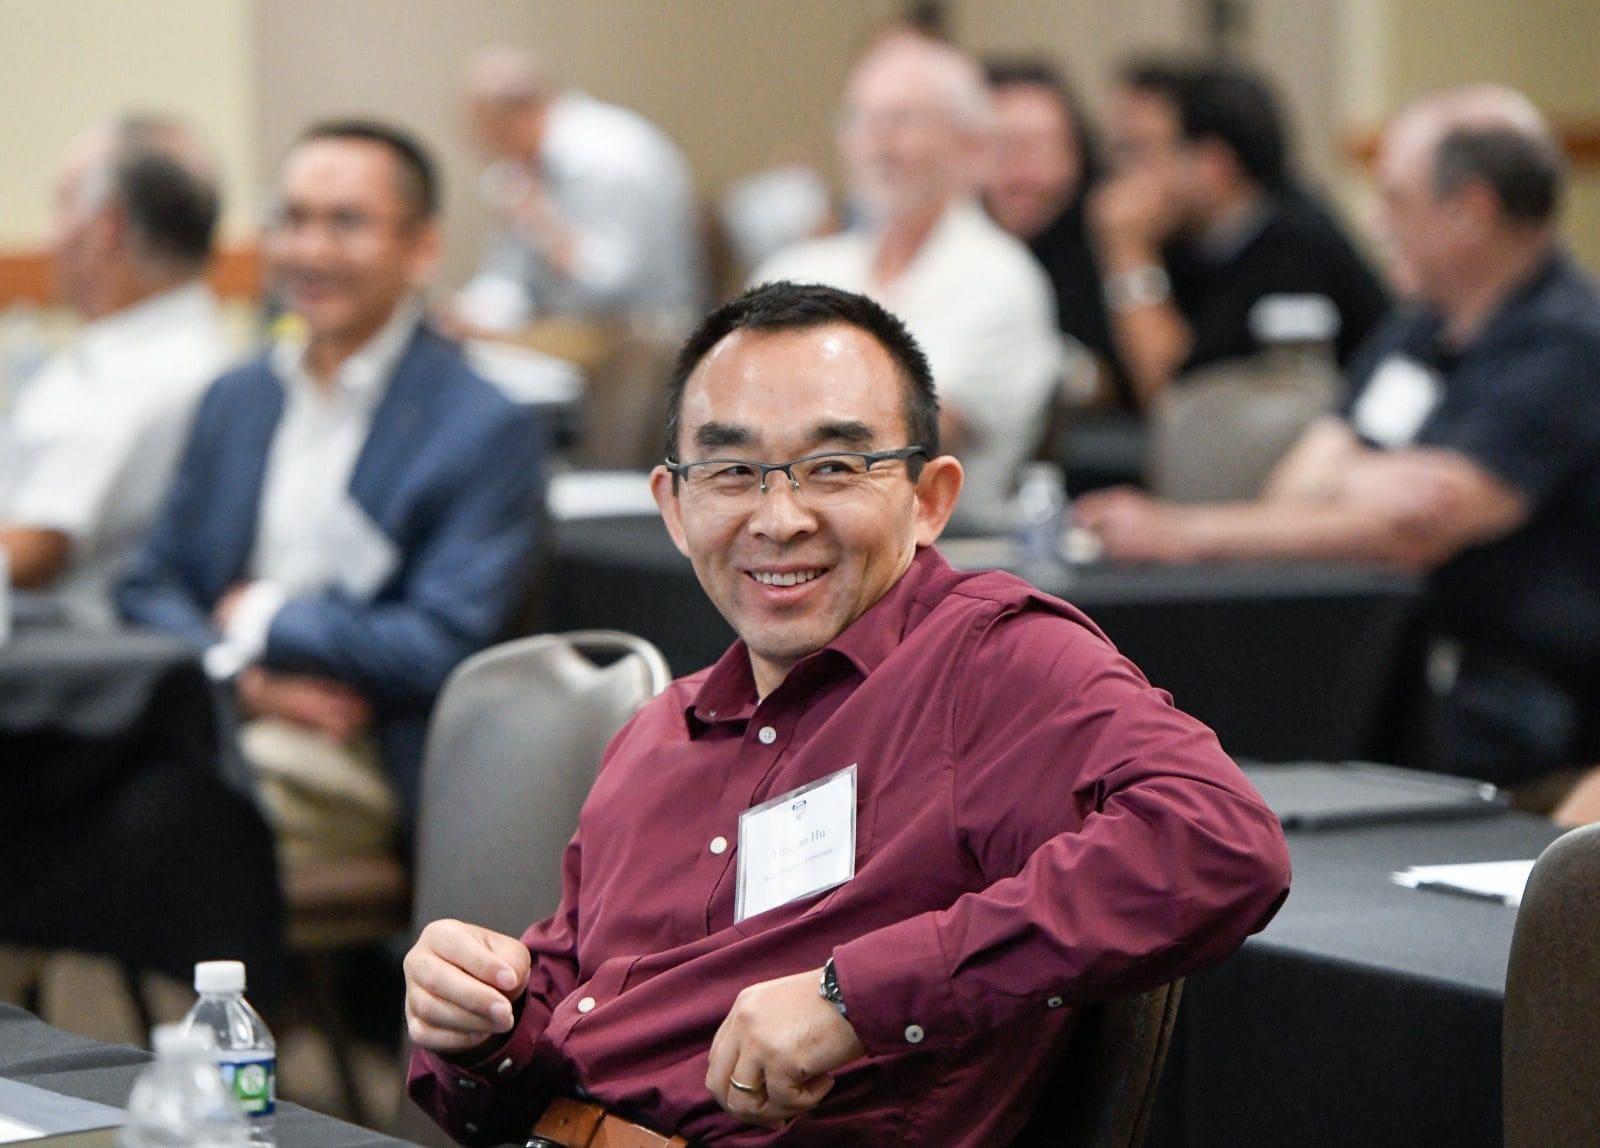 man in a button-down shirt smiling at a conference table